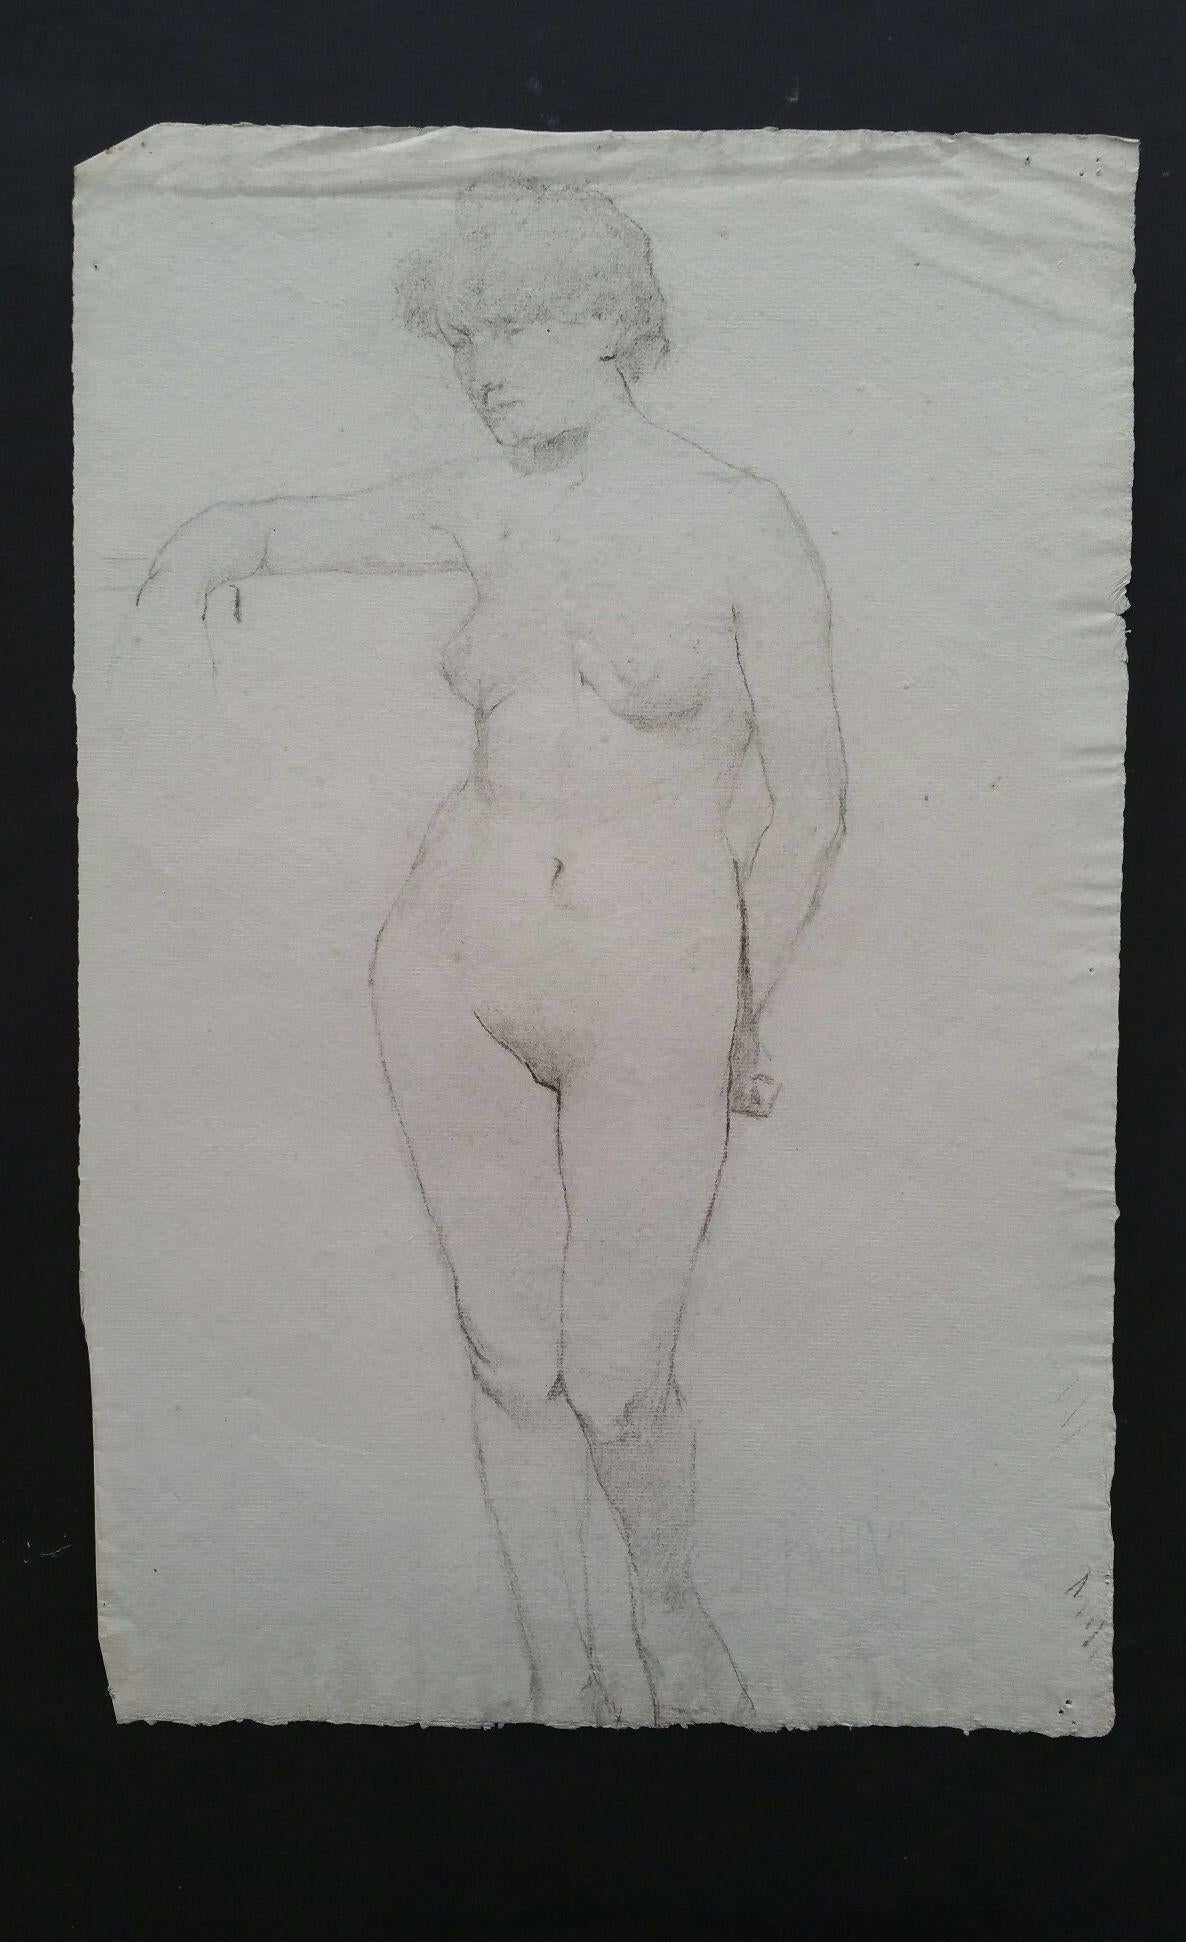 English graphite sketch of a female nude, standing facing
by Henry George Moon (British 1857-1905)
on off white artists paper, unframed
measurements: sheet 18.5 x 12 inches 

provenance: from the artists estate

Condition report: pin holes to